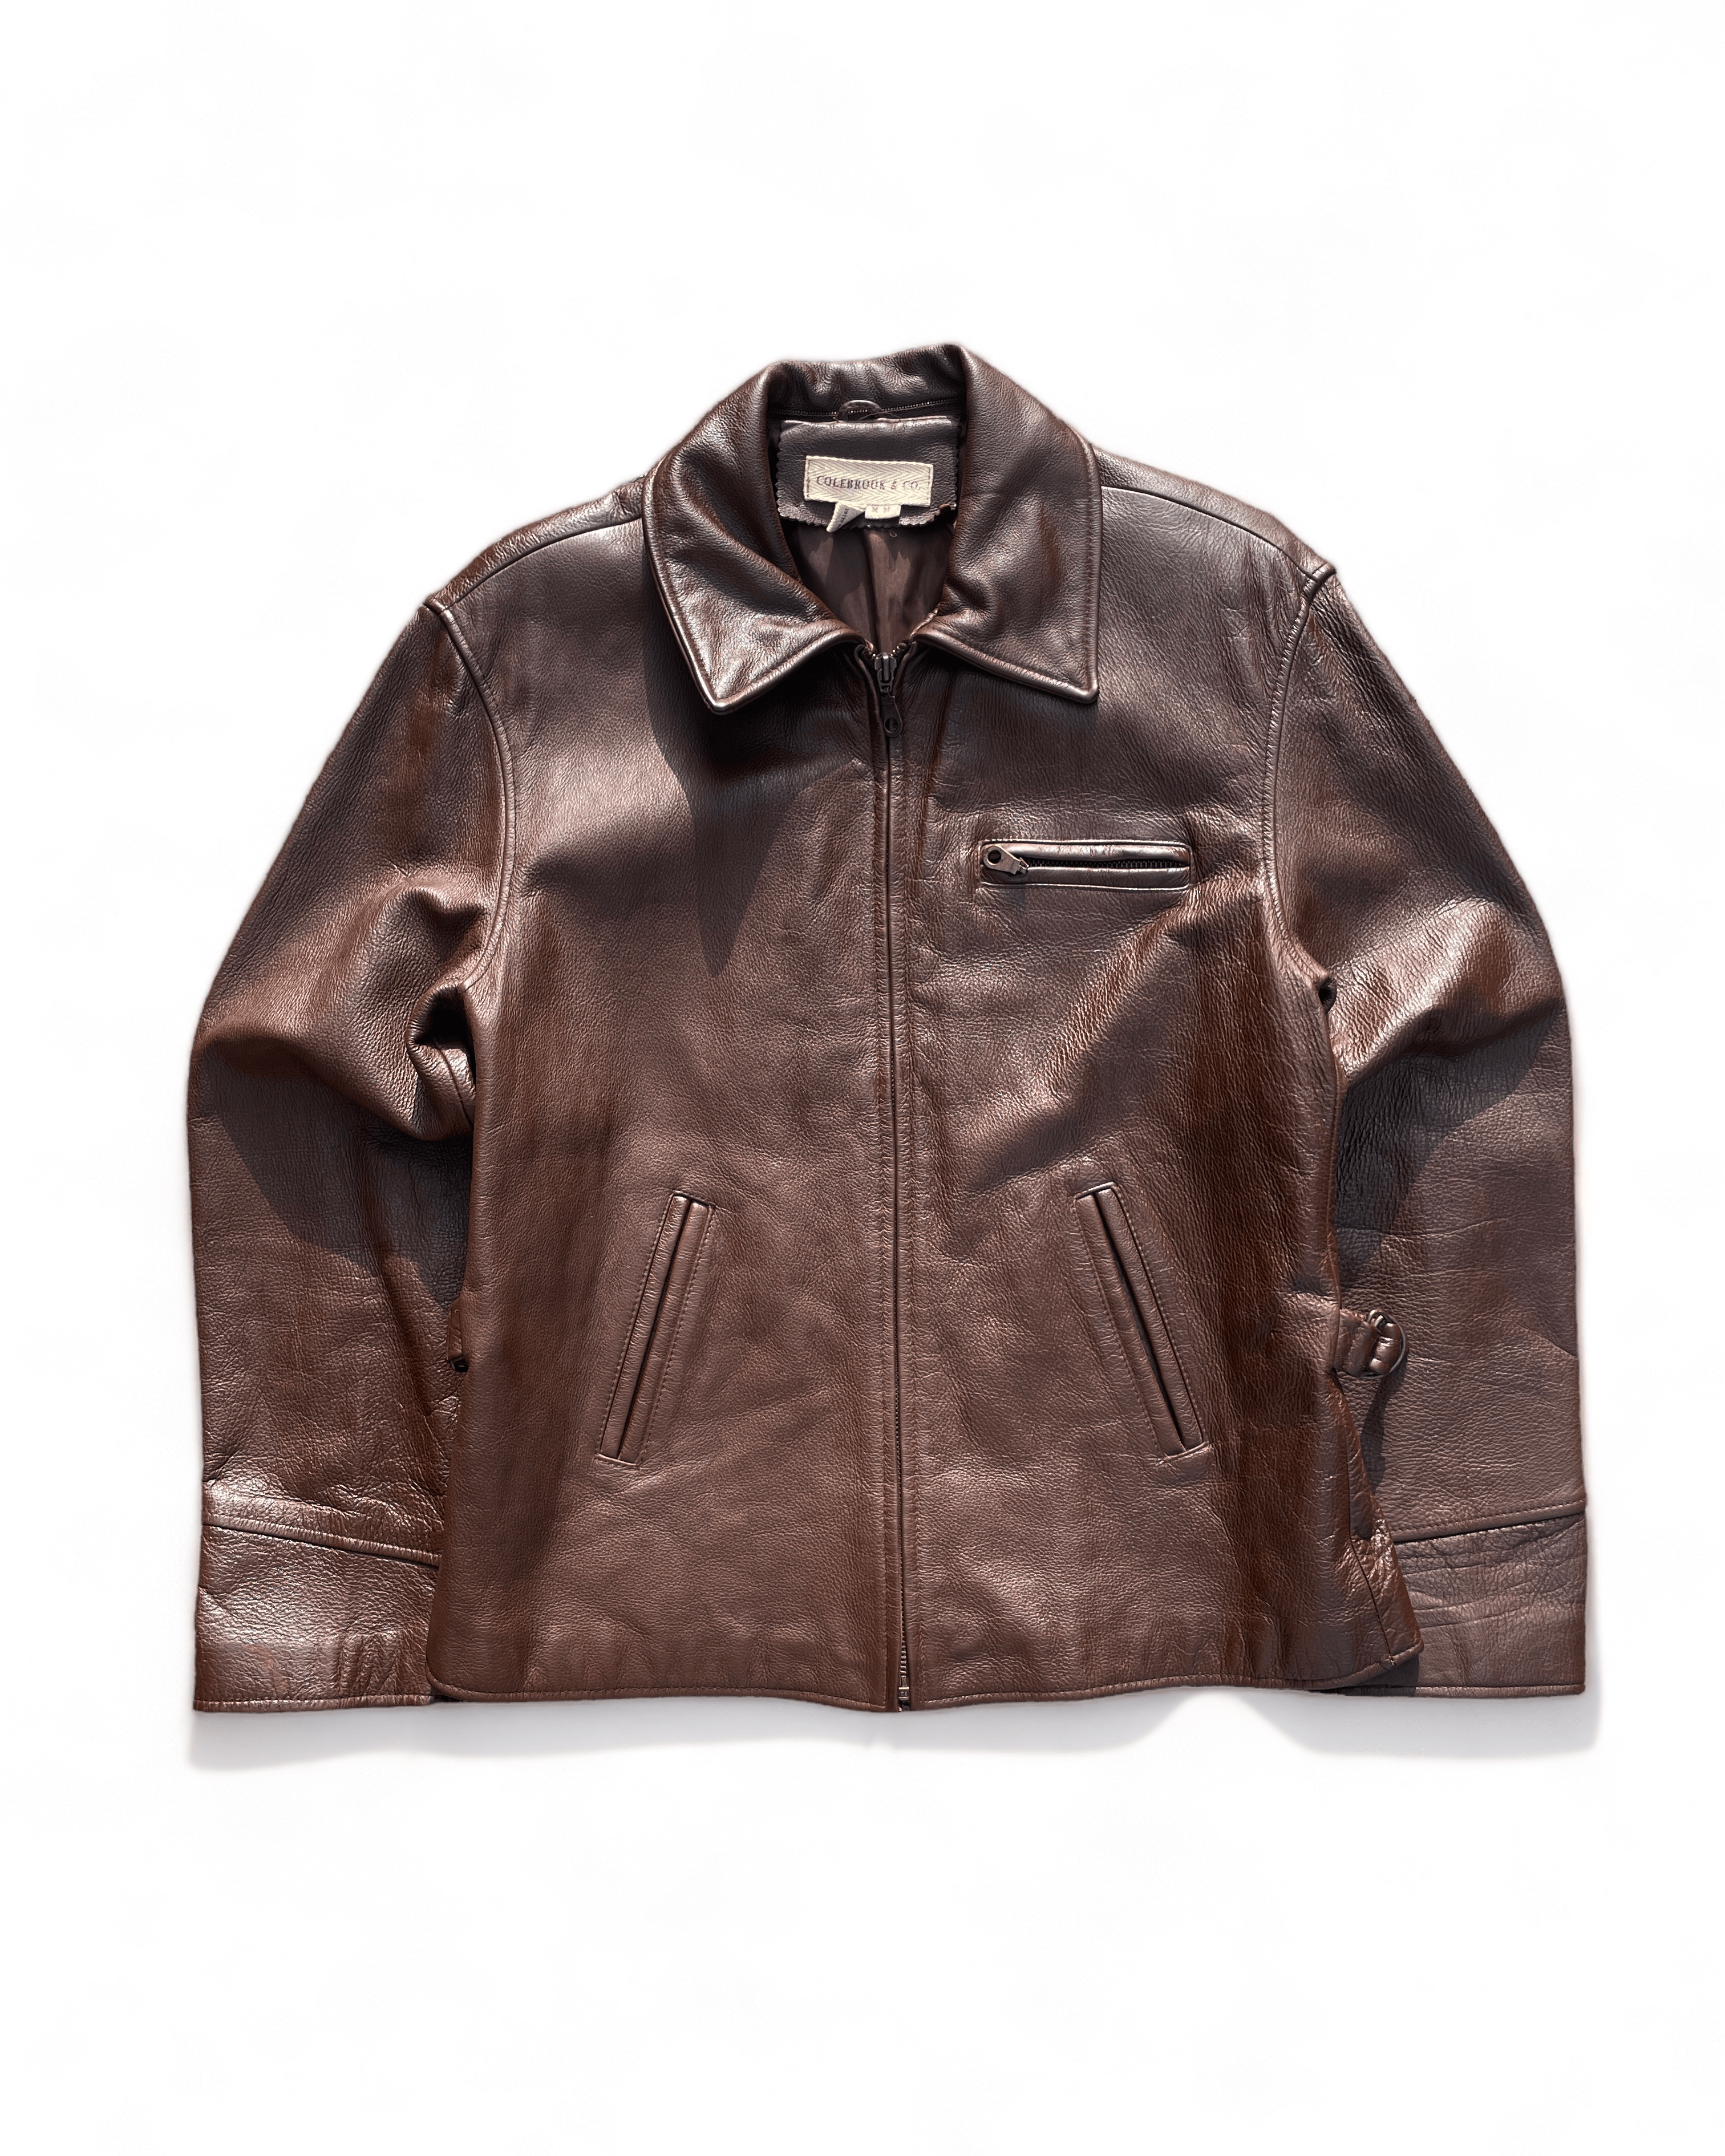 Vintage Colebrook Leather Classic Driving Jacket